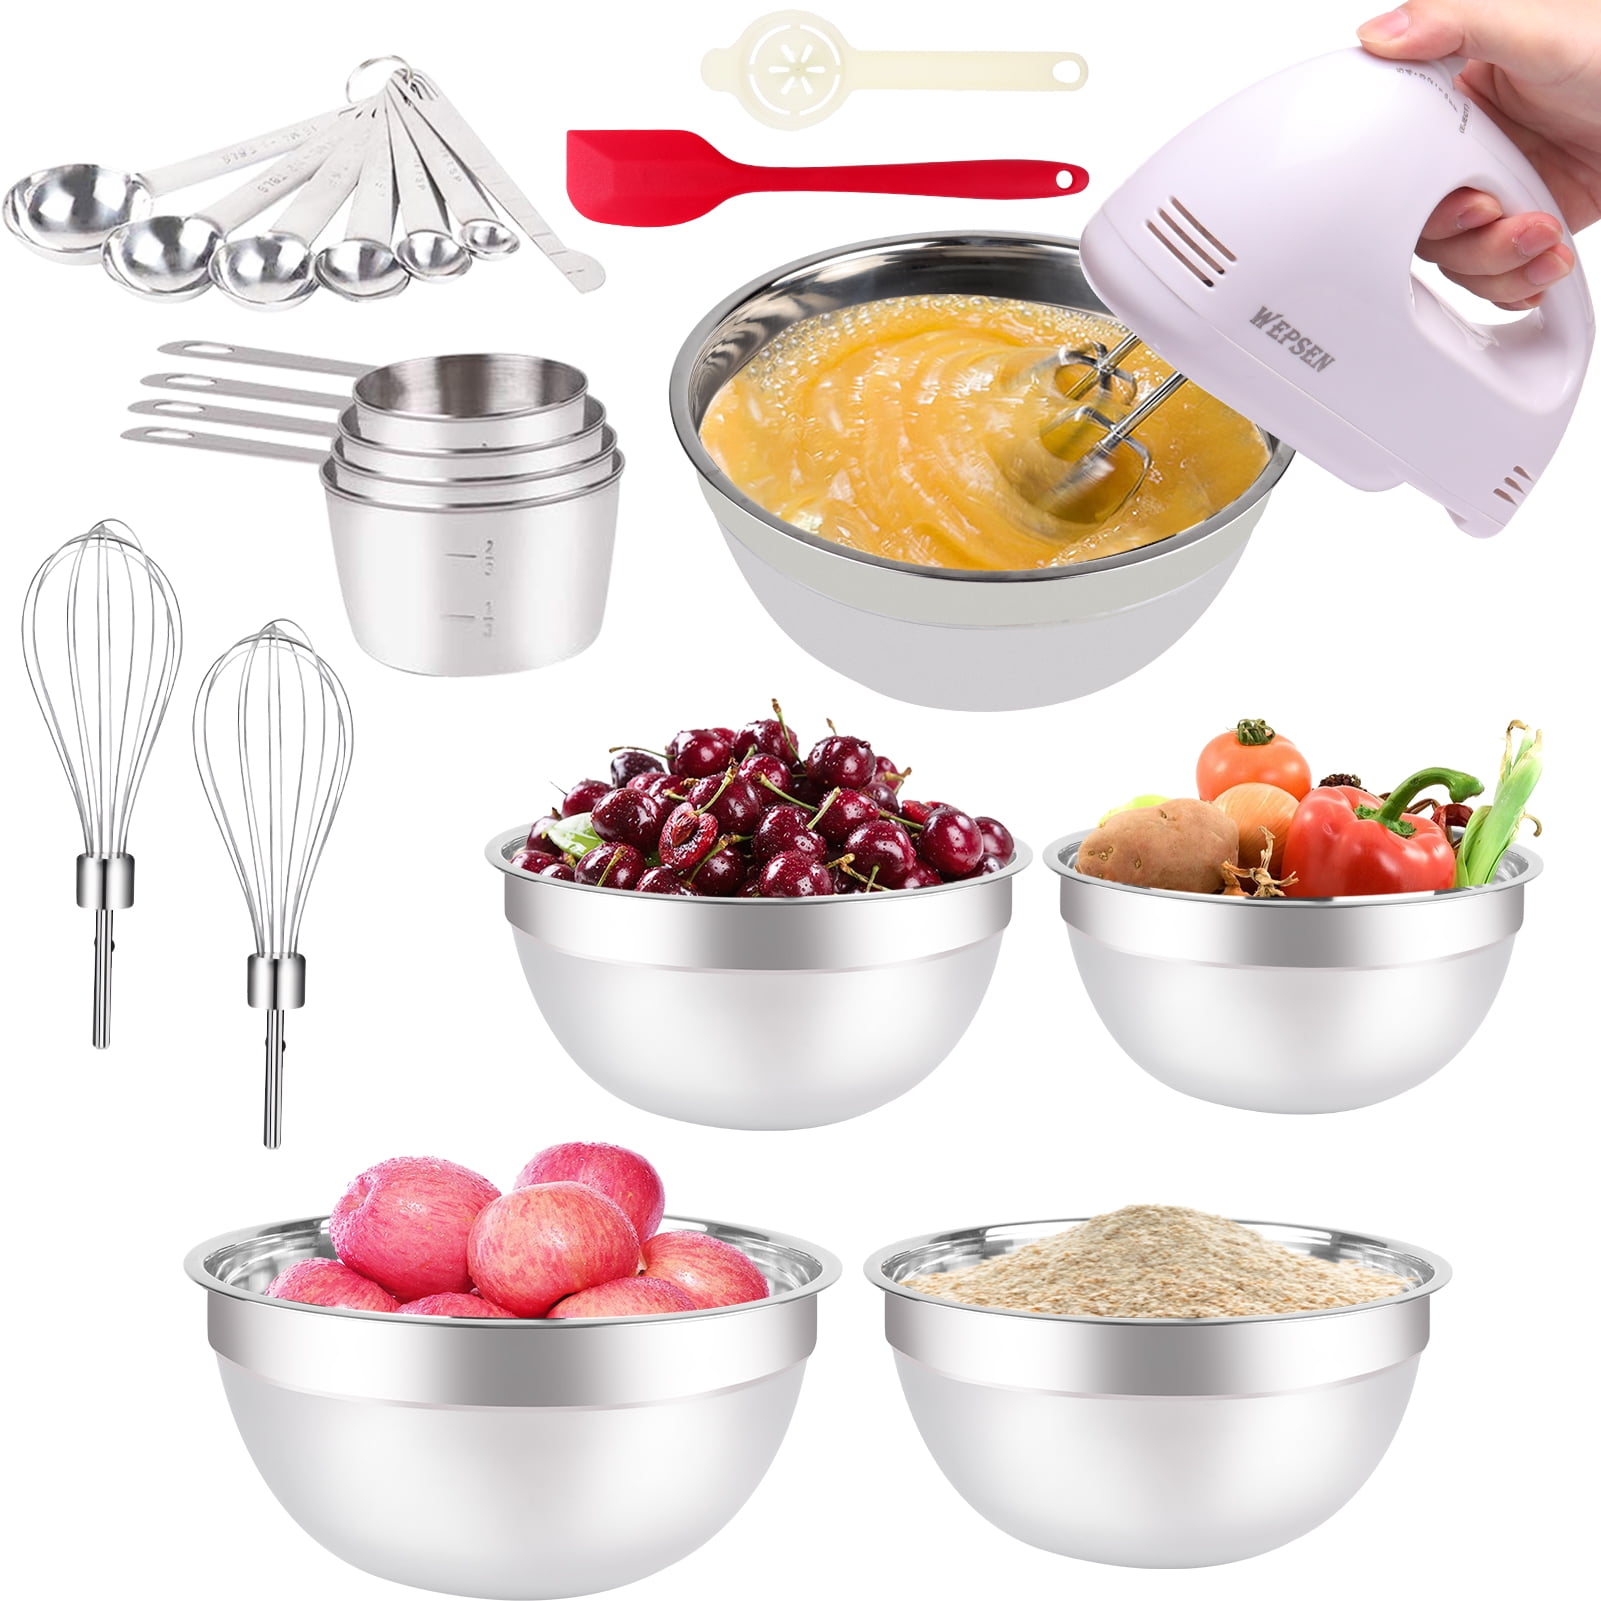 Electric Hand Mixer with Mixing Bowls Set, Hand Mixers for Kitchen,  5-Speeds Hand Mixer with Whisks Beater Stainless Steel Metal Nesting Mixing  Bowl